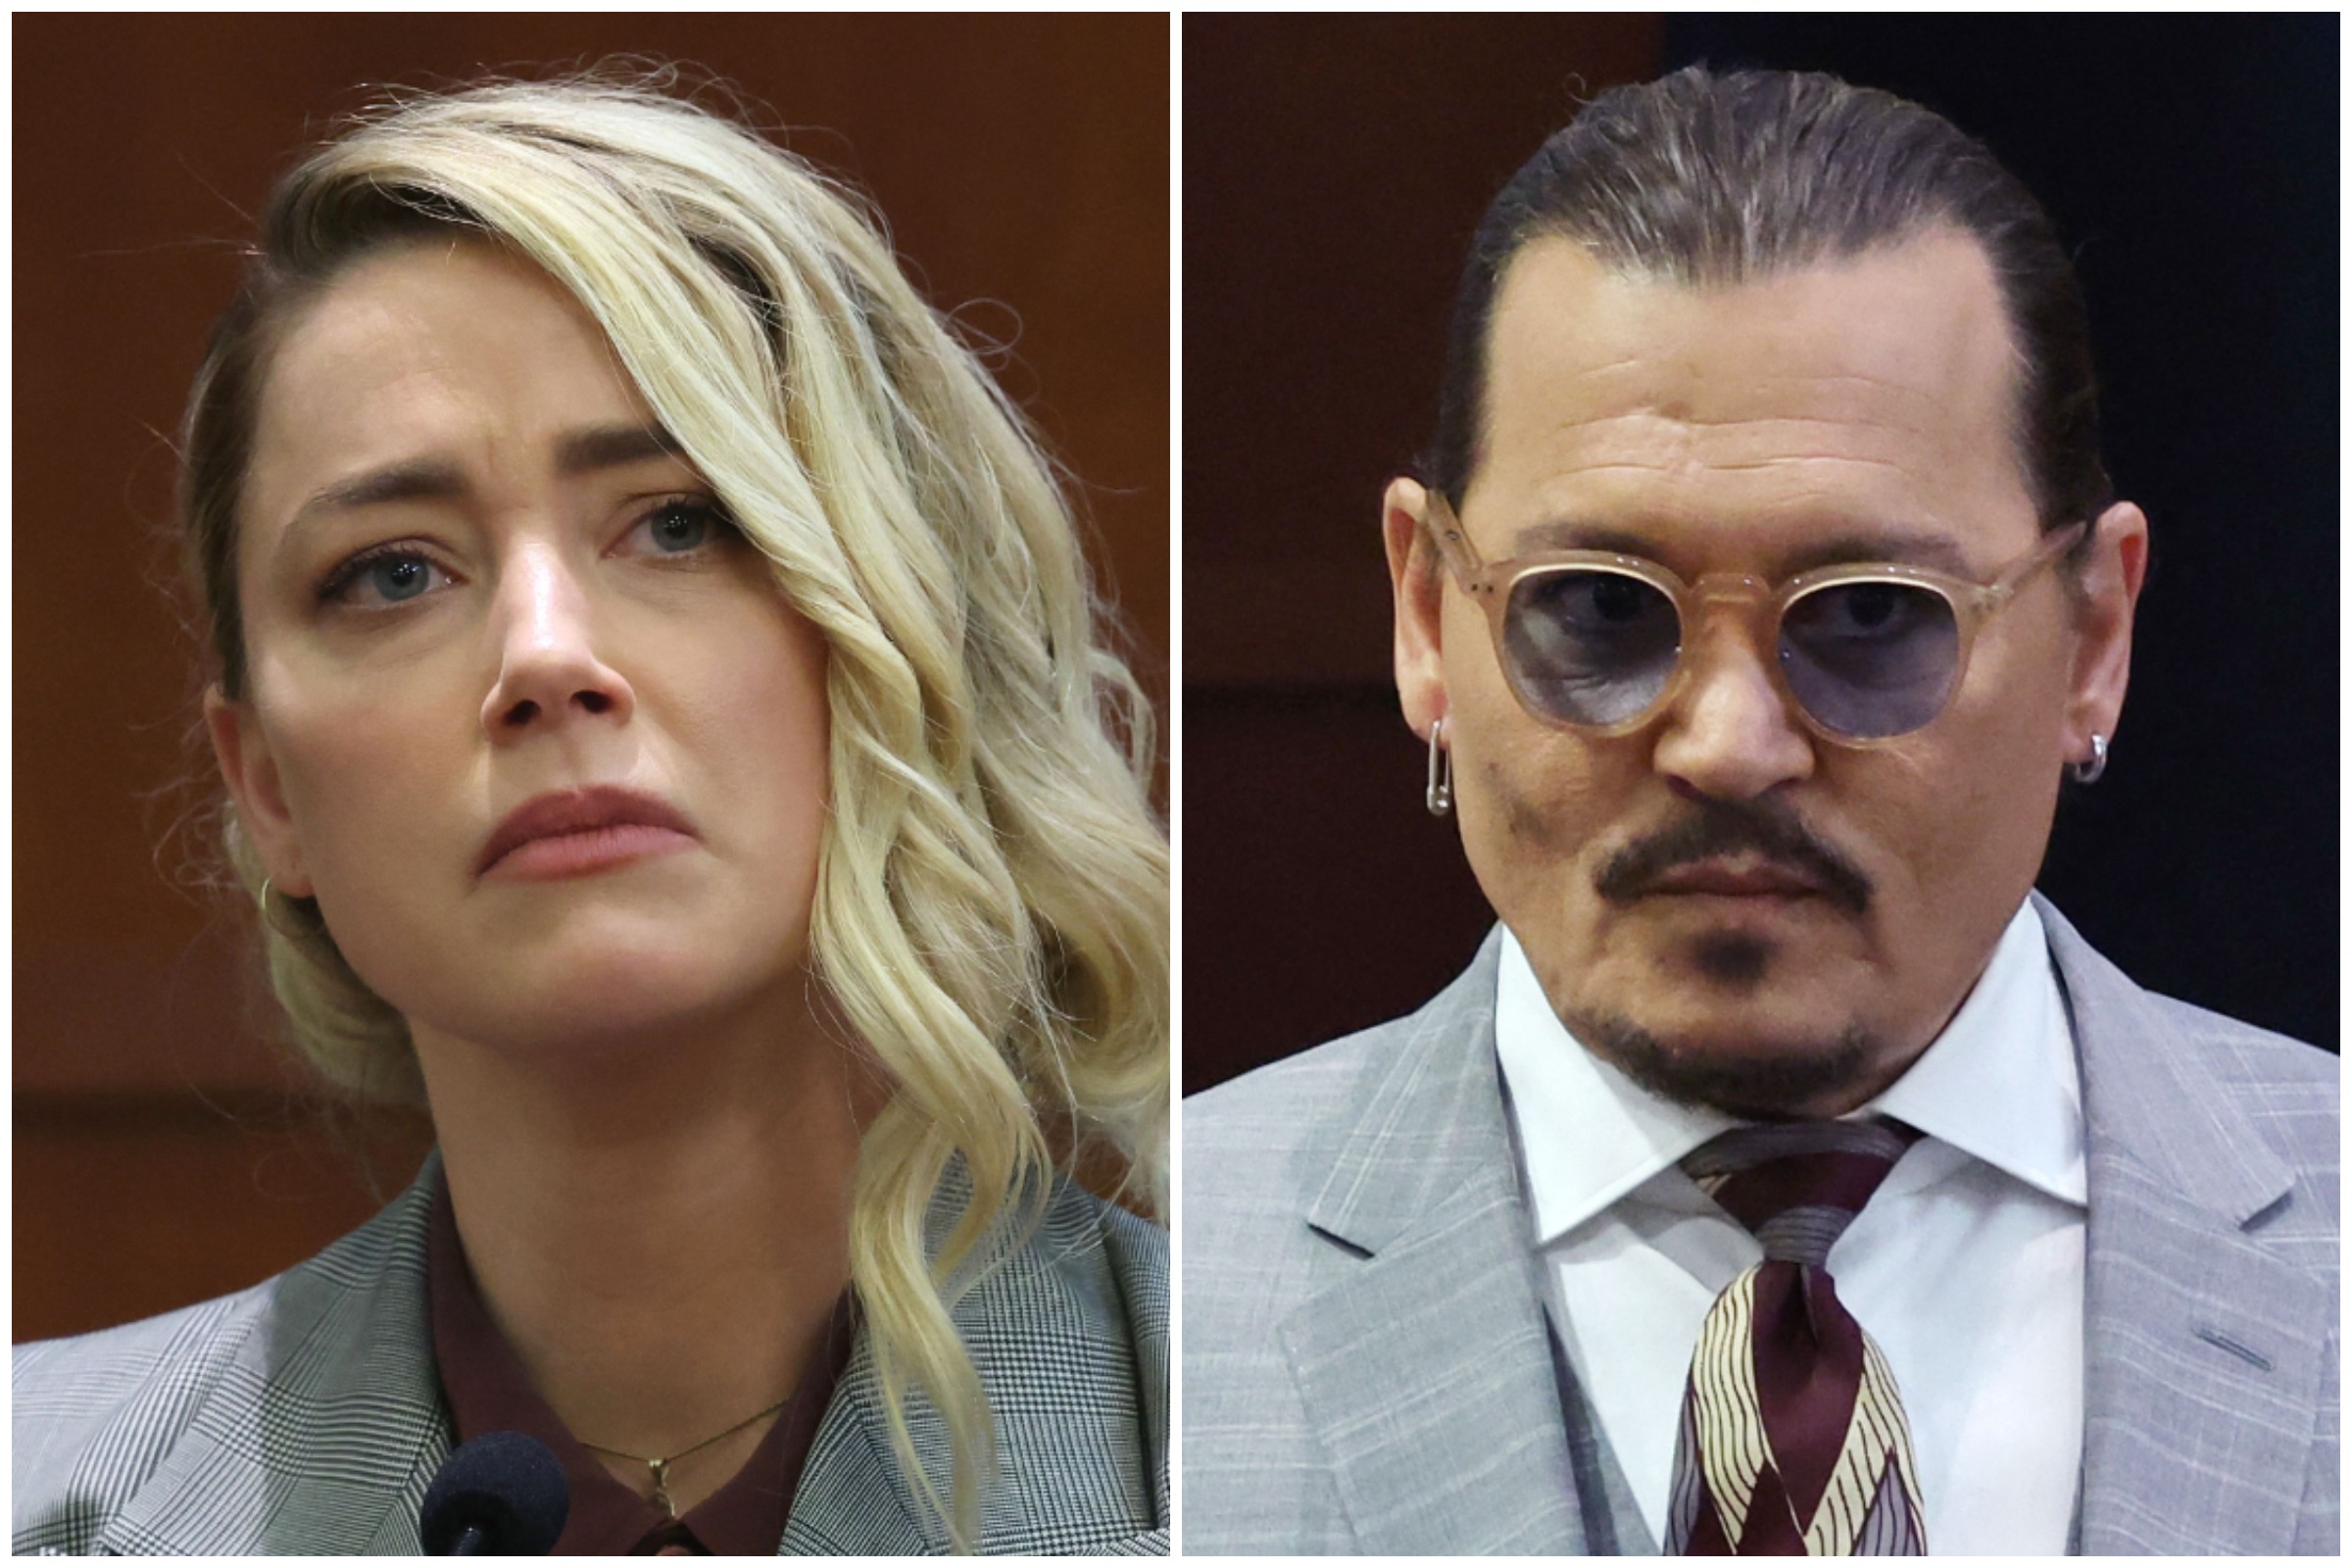 Amber Heard Says Johnny Depp Threatened To Kill Her Threw Glass Bottles At The Economic Times 